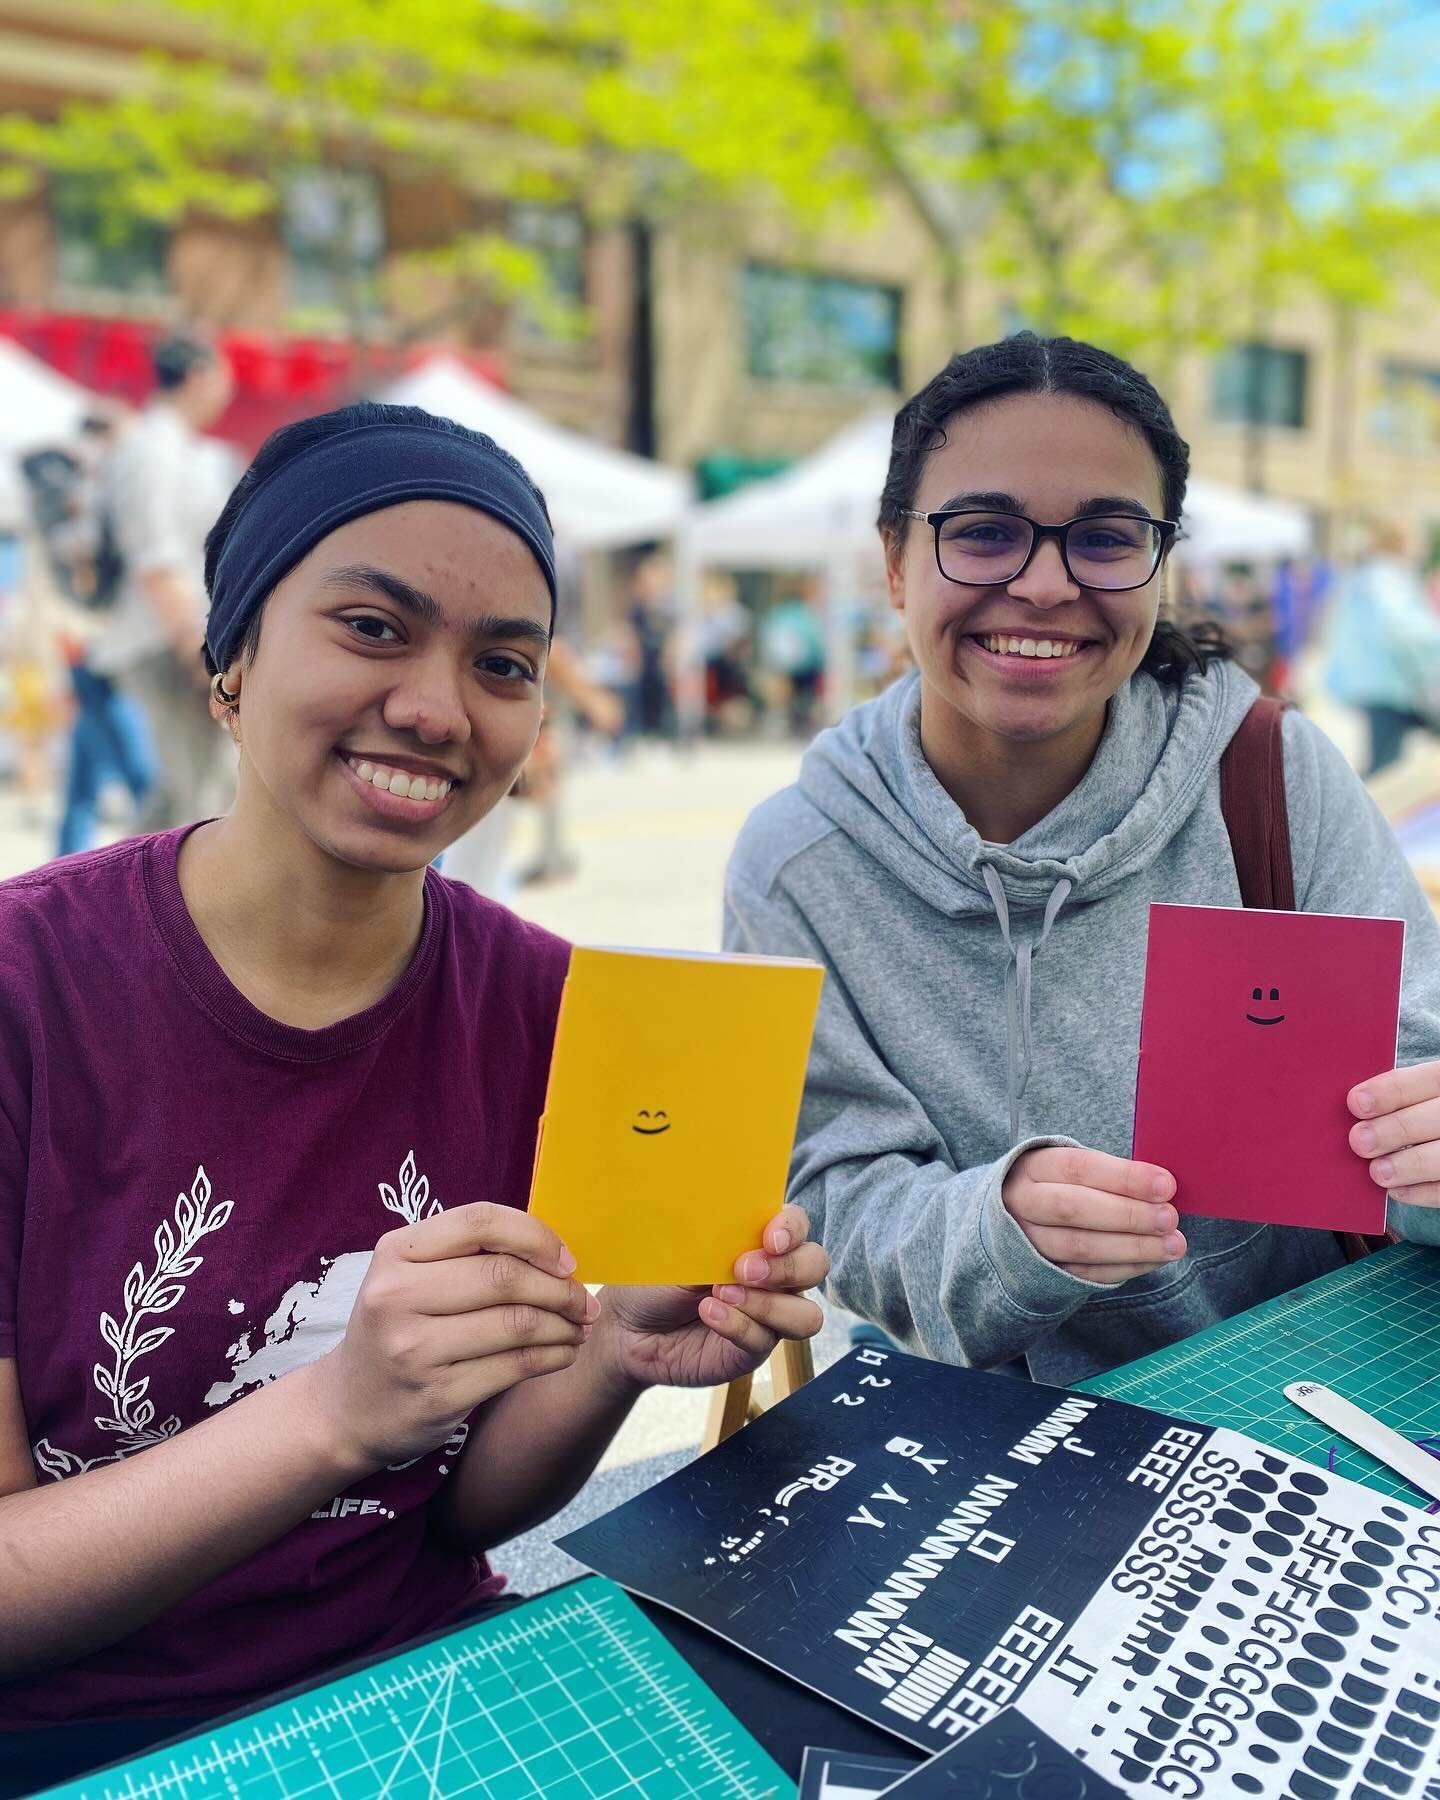 Excellent books were made by @pavani.jairam and @saralyncarcy today at @evanstonaspa Umbrella Arts Festival! 

Thanks to @reginigloria of @northbranchprojects and to @thepurplelineart and @mroman14 for all their hard work today!

Thanks to all who ca